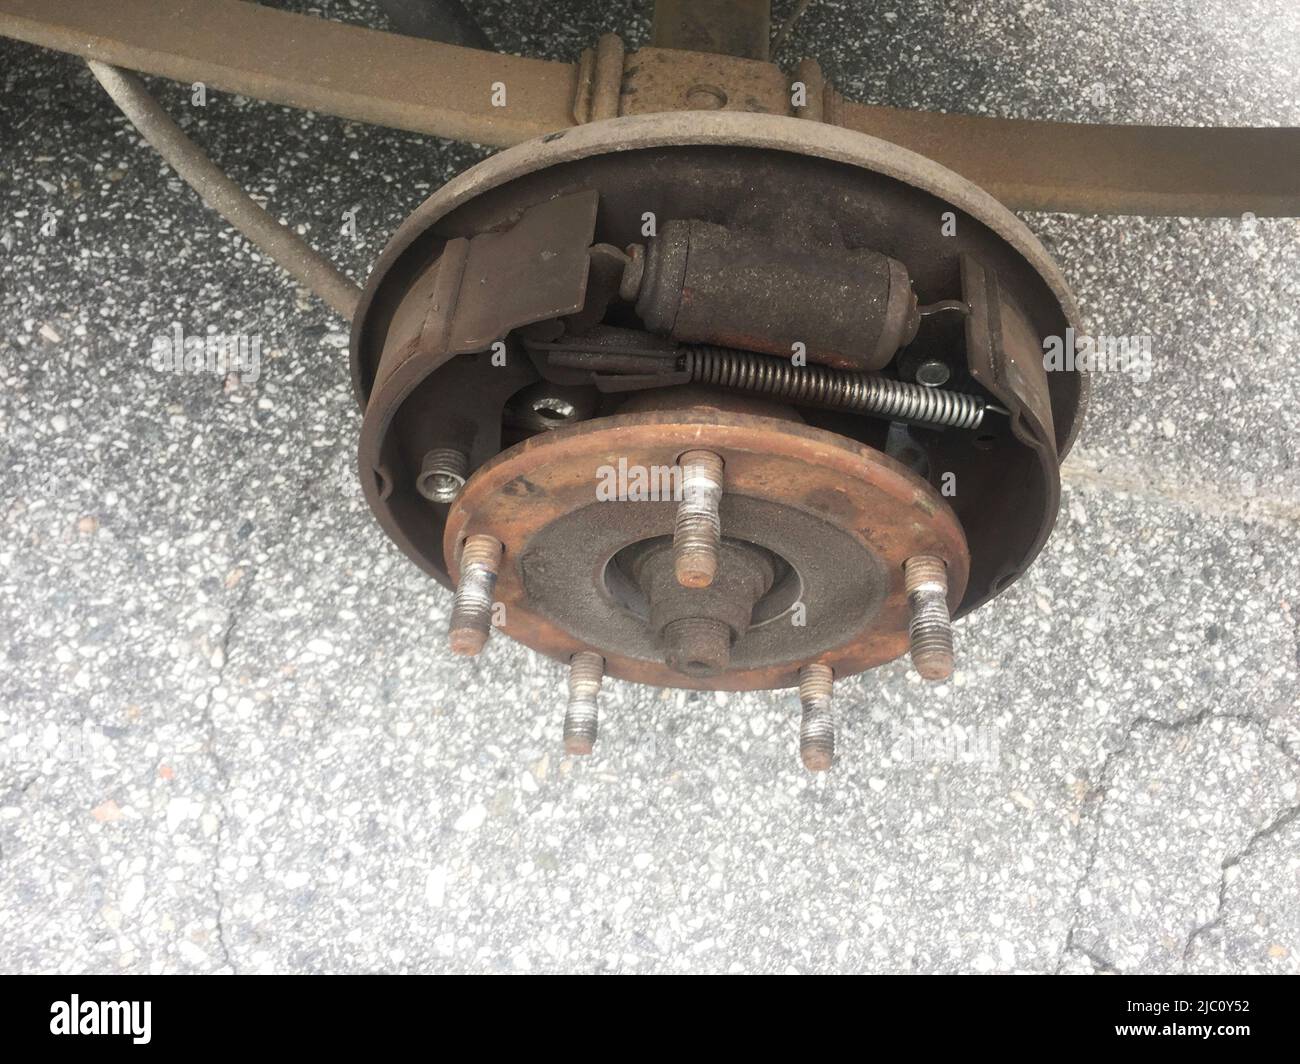 Illustrative photo, Ford Transit,rusty rear car wheel hub with drum brake  system and suspension, car breakdown, accident, vehicle malfunction,  failure Stock Photo - Alamy